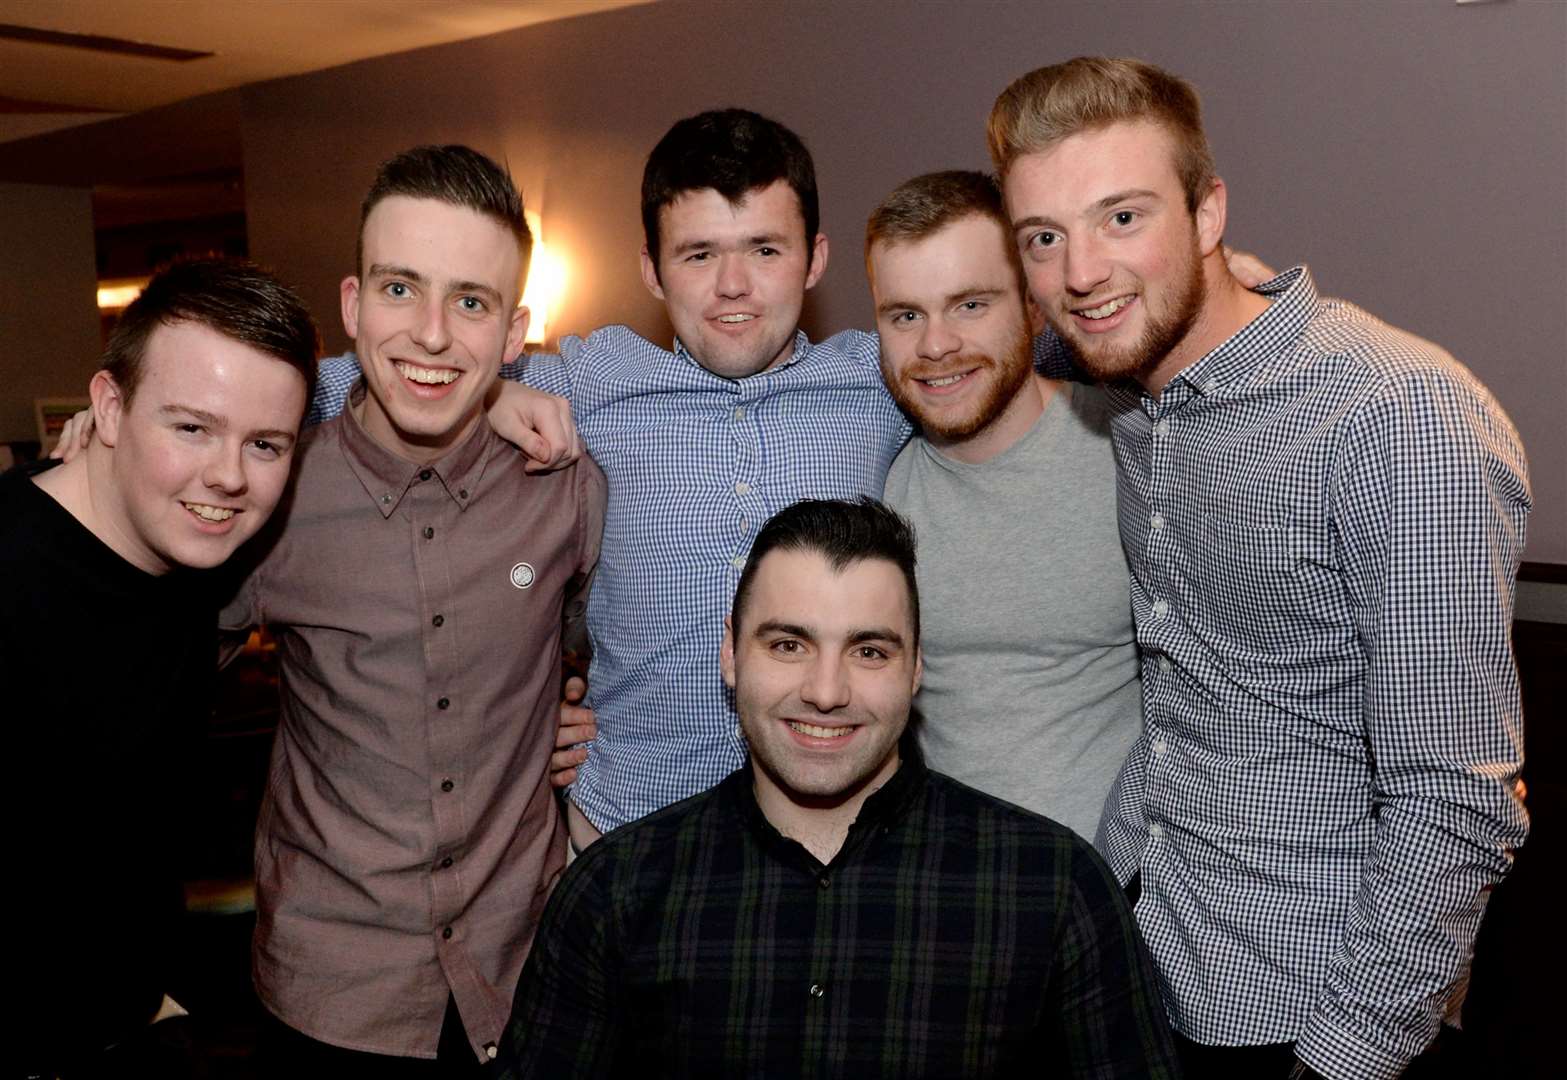 Grant Elder(centre) from Nairn enjoys his 22nd birthday with mates.